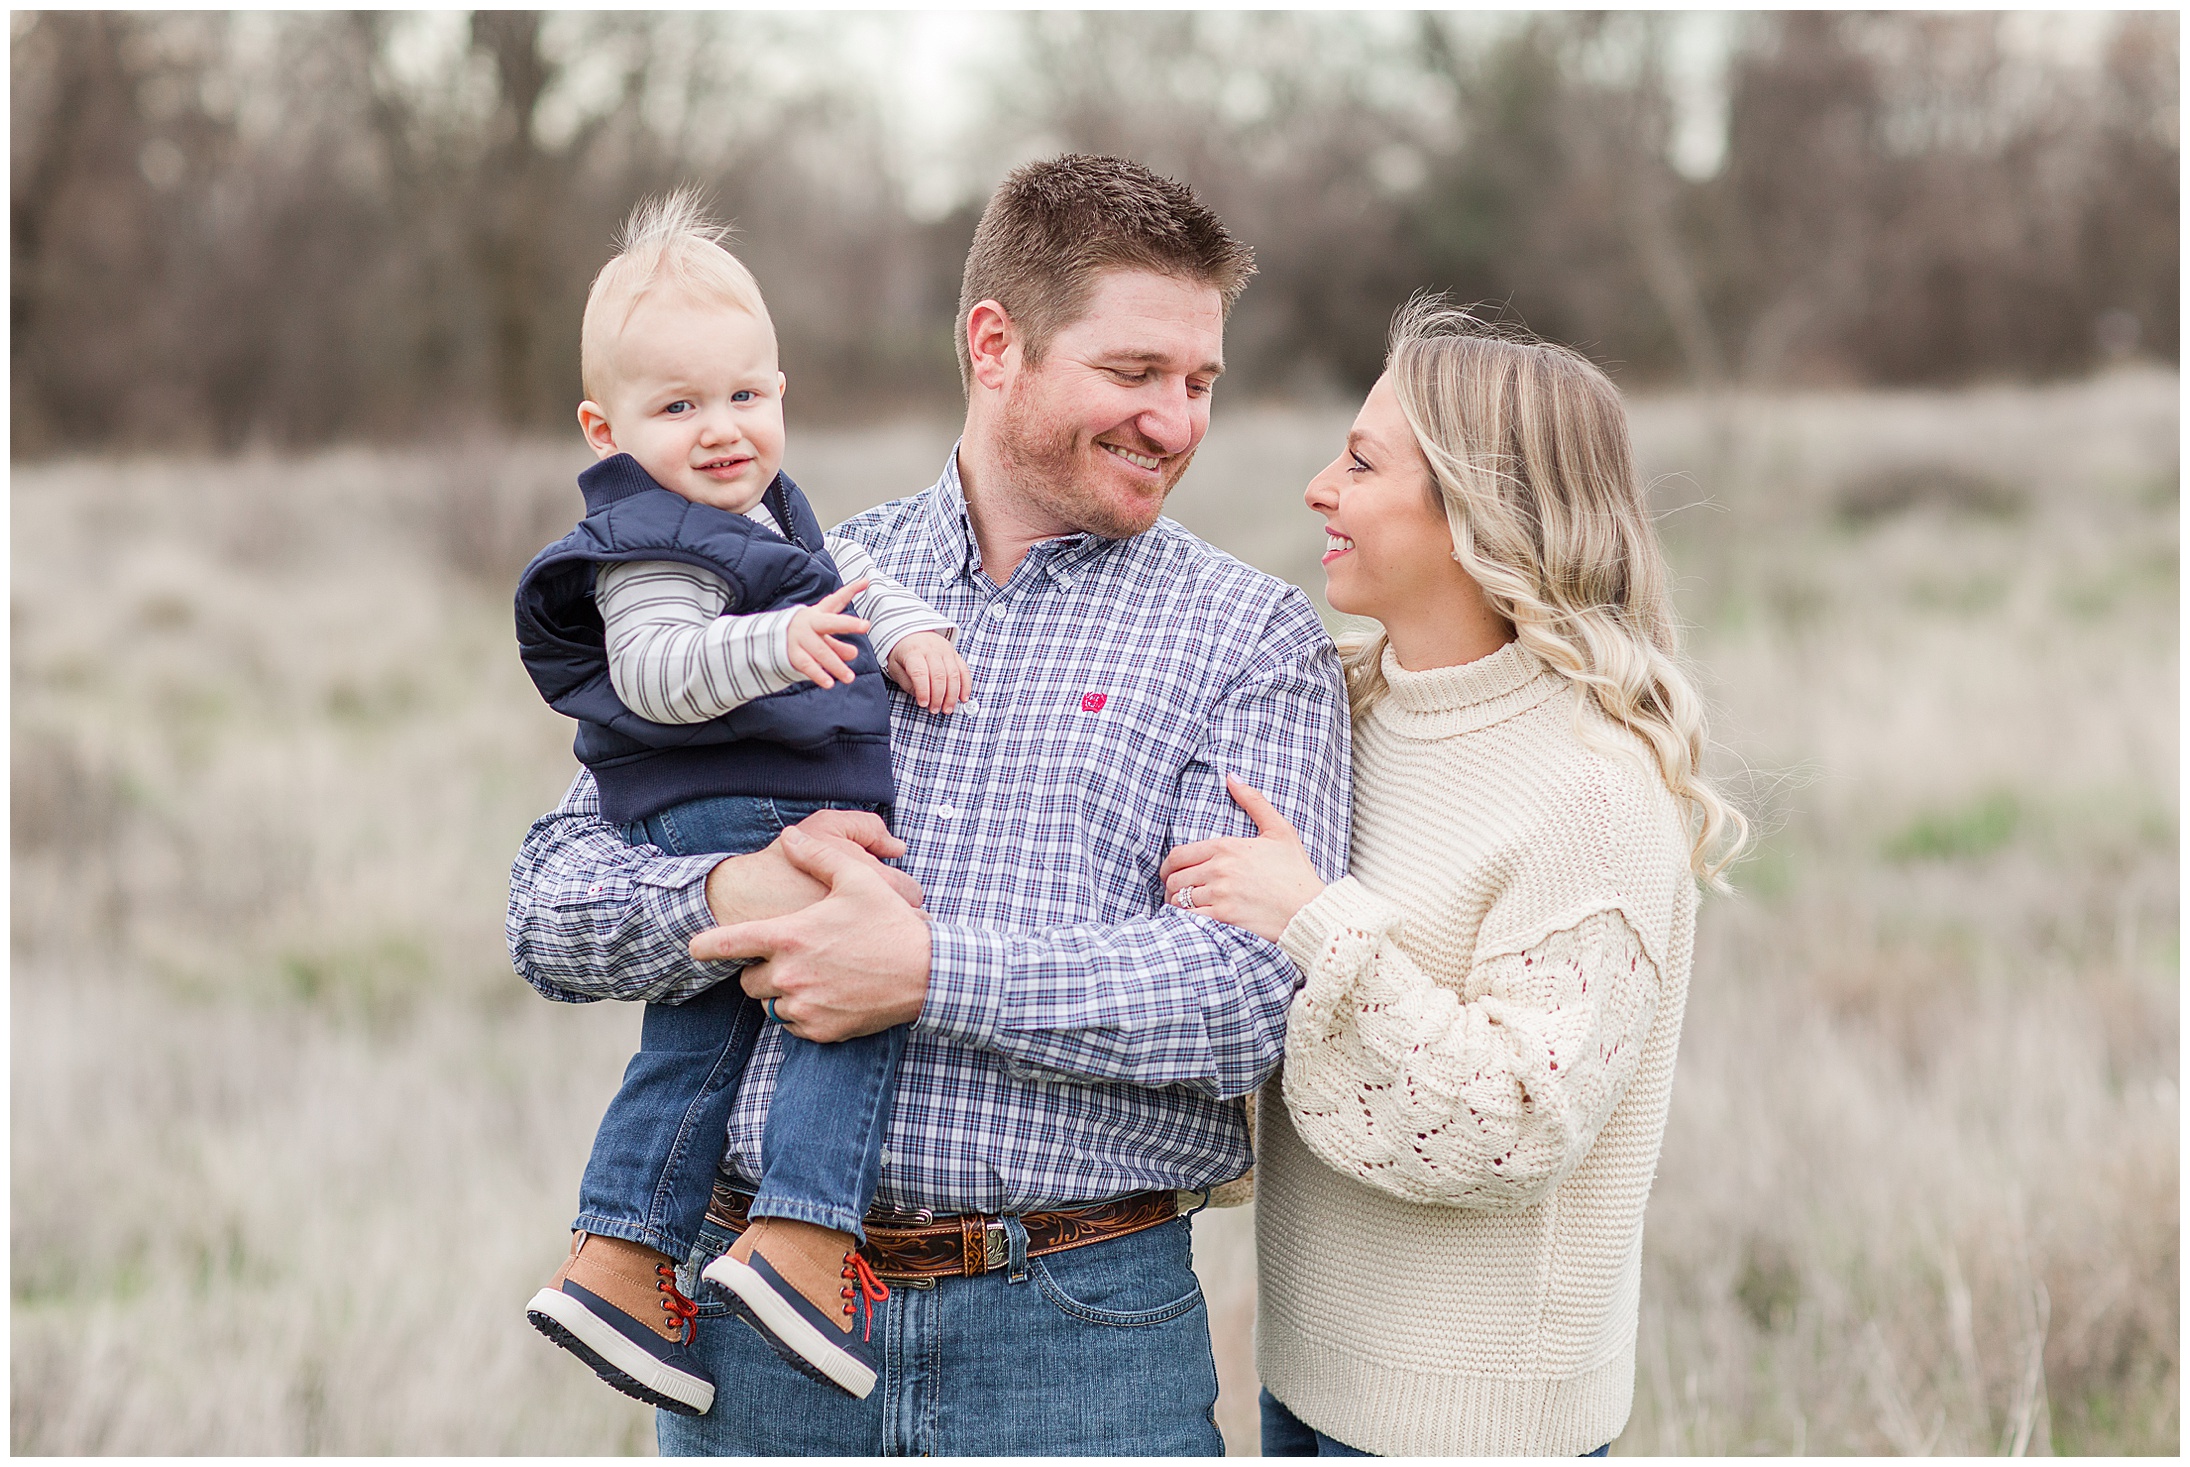 Grassy Field Family Session Winter January First Birthday,